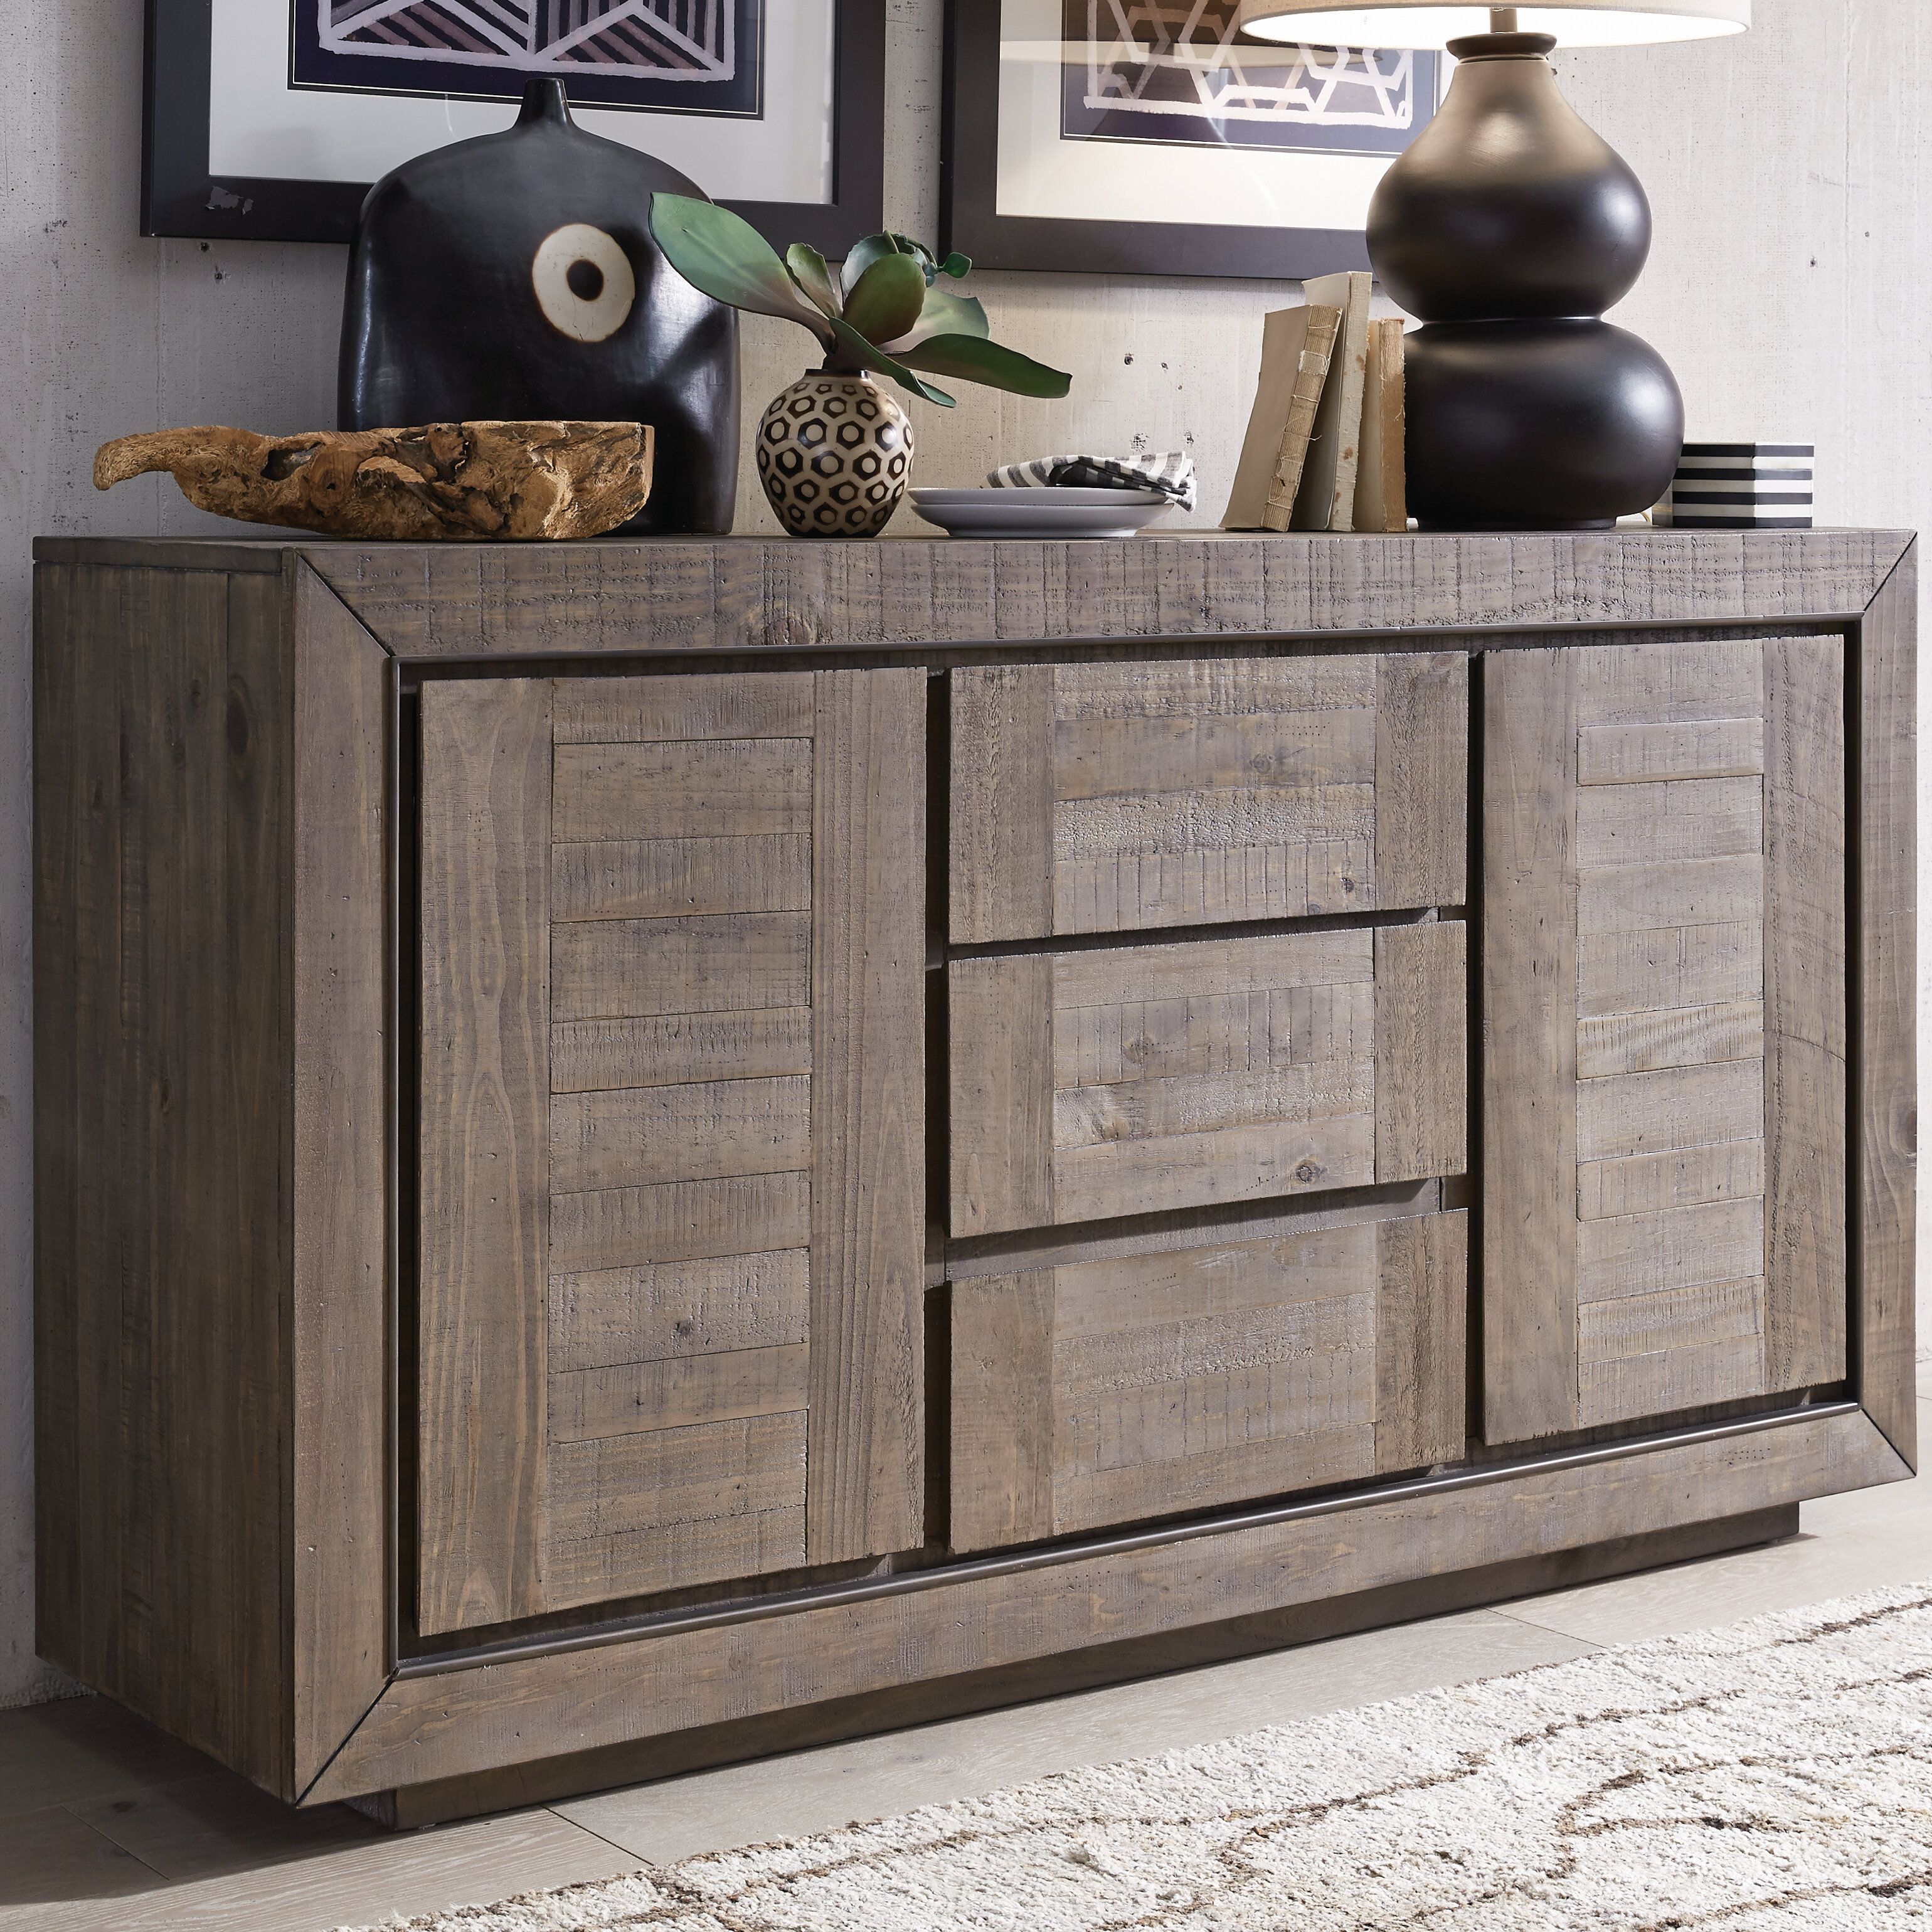 Foundry Select Norah Sideboard | Wayfair Inside Sideboards By Foundry Select (View 20 of 30)